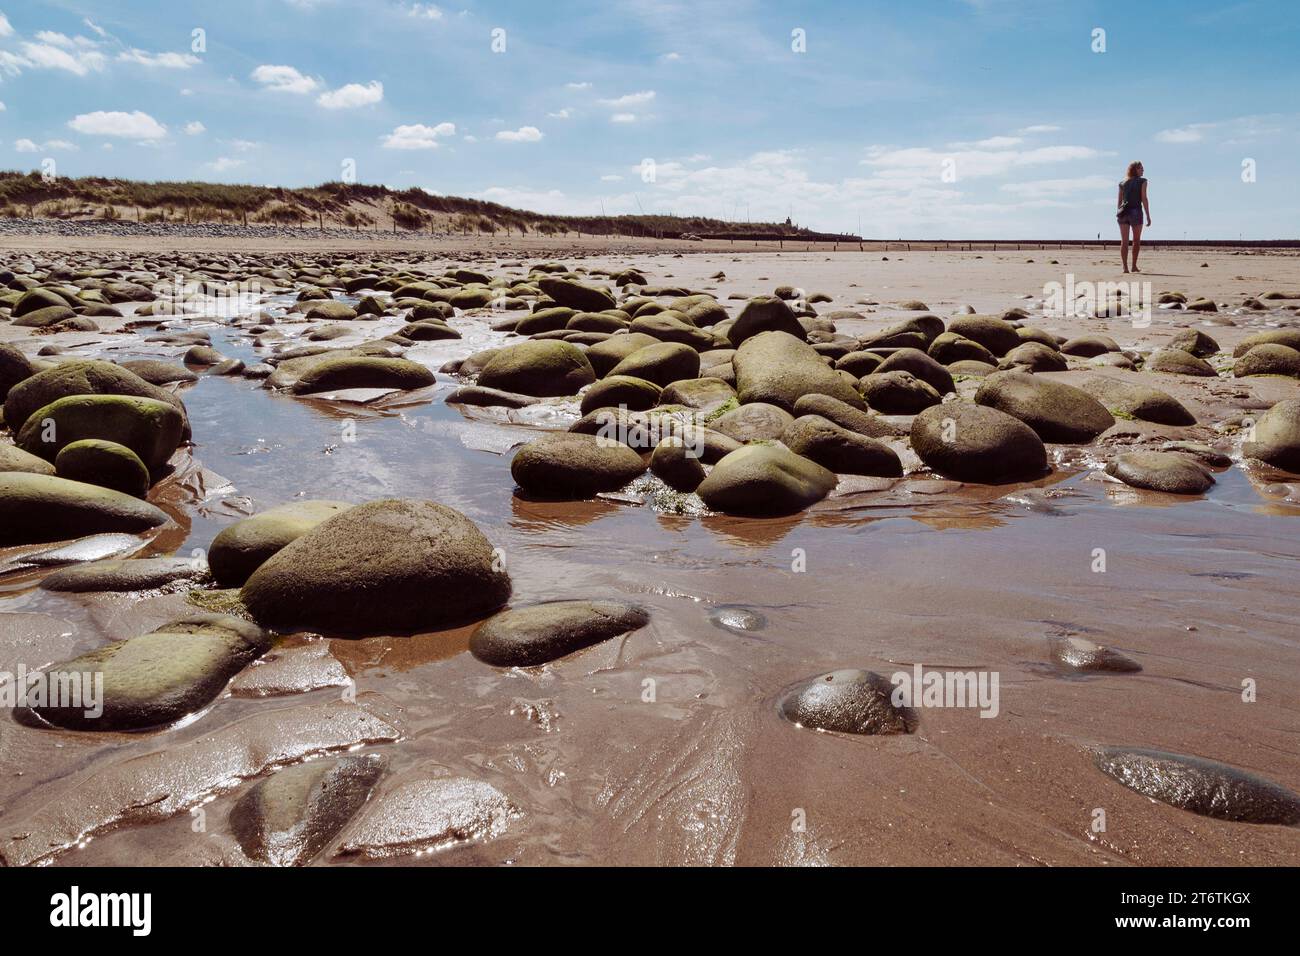 A woman enjoys a walk on the beach past some large round rocks in the sand in Abersoch in West Wales in the UK Stock Photo